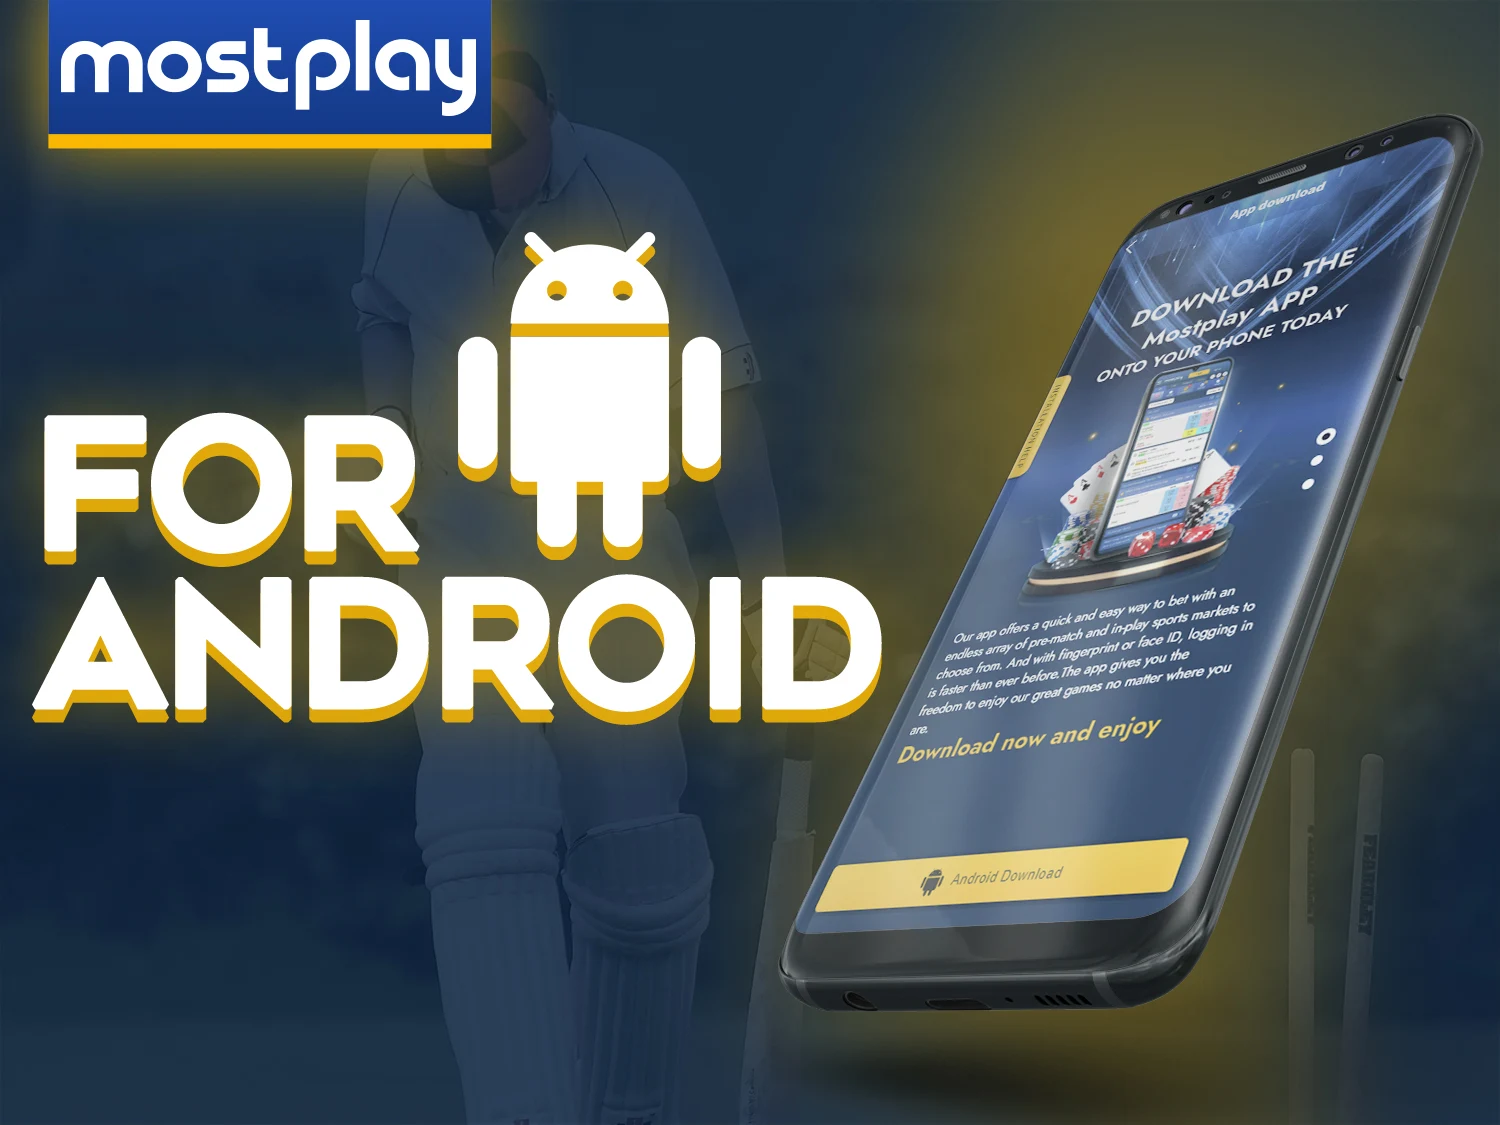 Install the Mostplay app on your Android device.